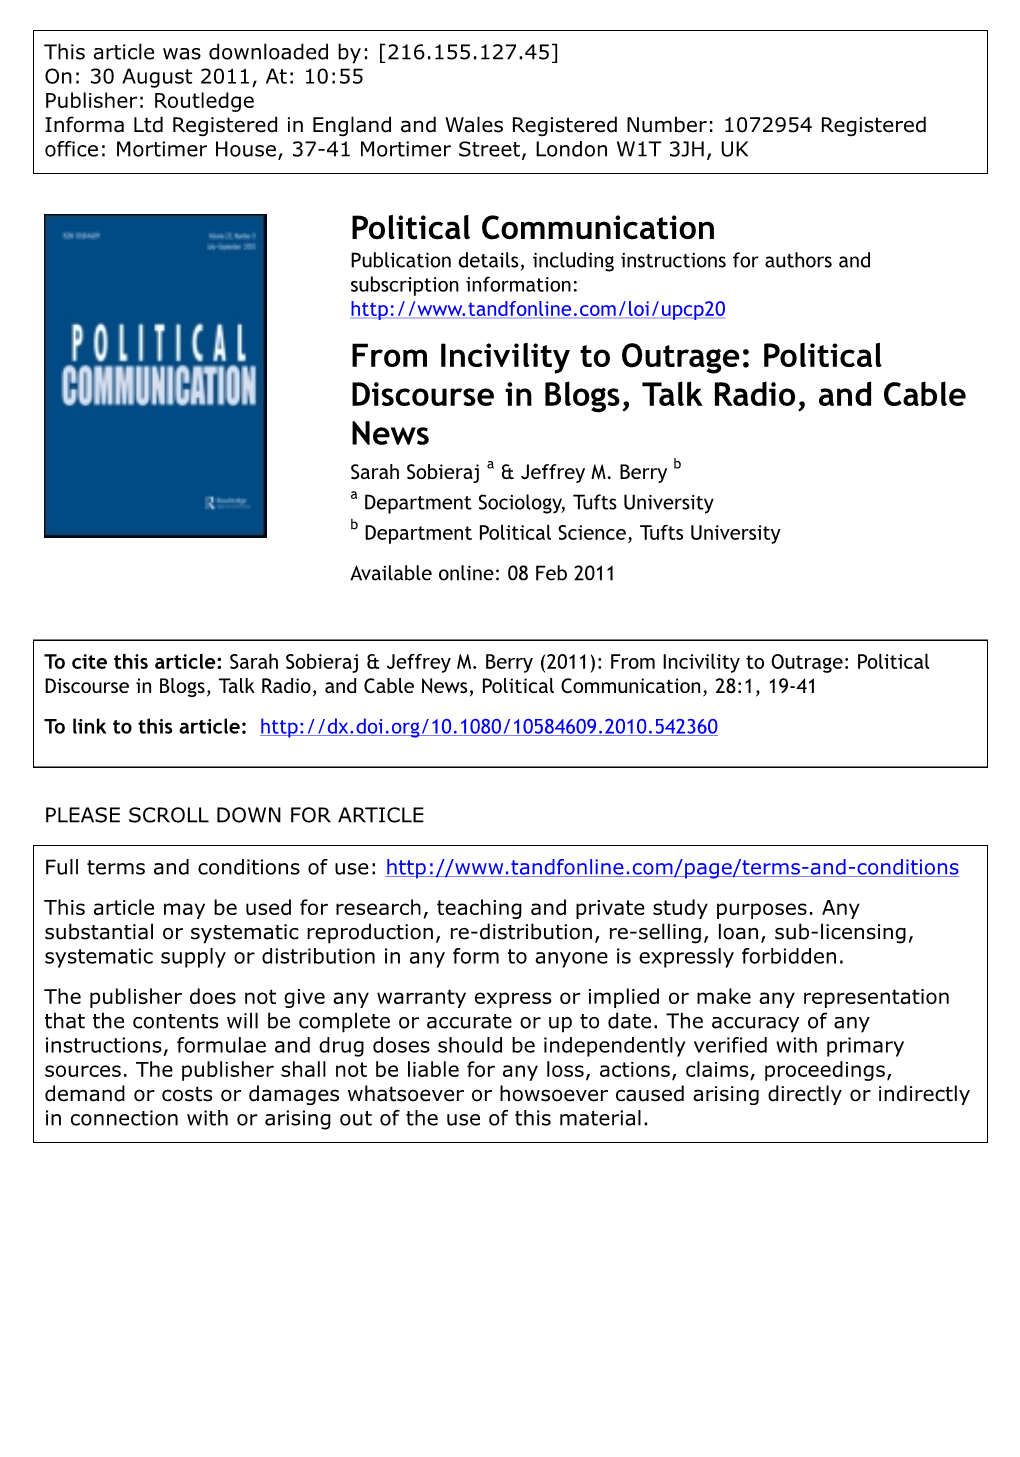 From Incivility to Outrage: Political Discourse in Blogs, Talk Radio, and Cable News Sarah Sobieraj a & Jeffrey M